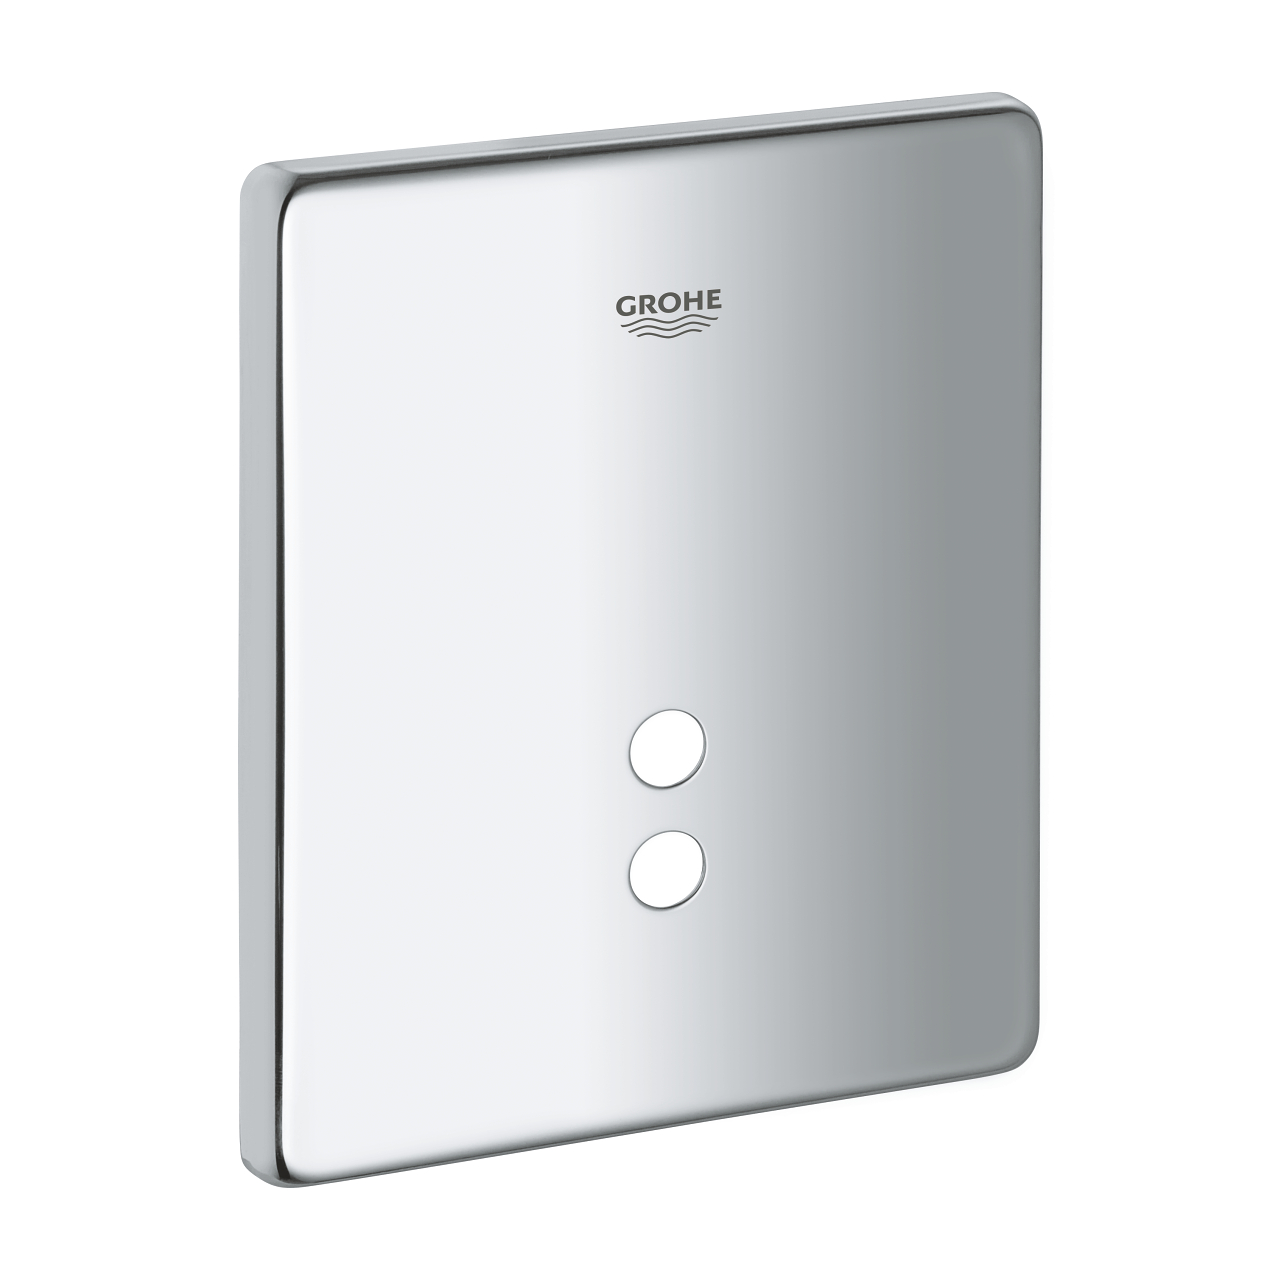 GROHE WALL PLATE